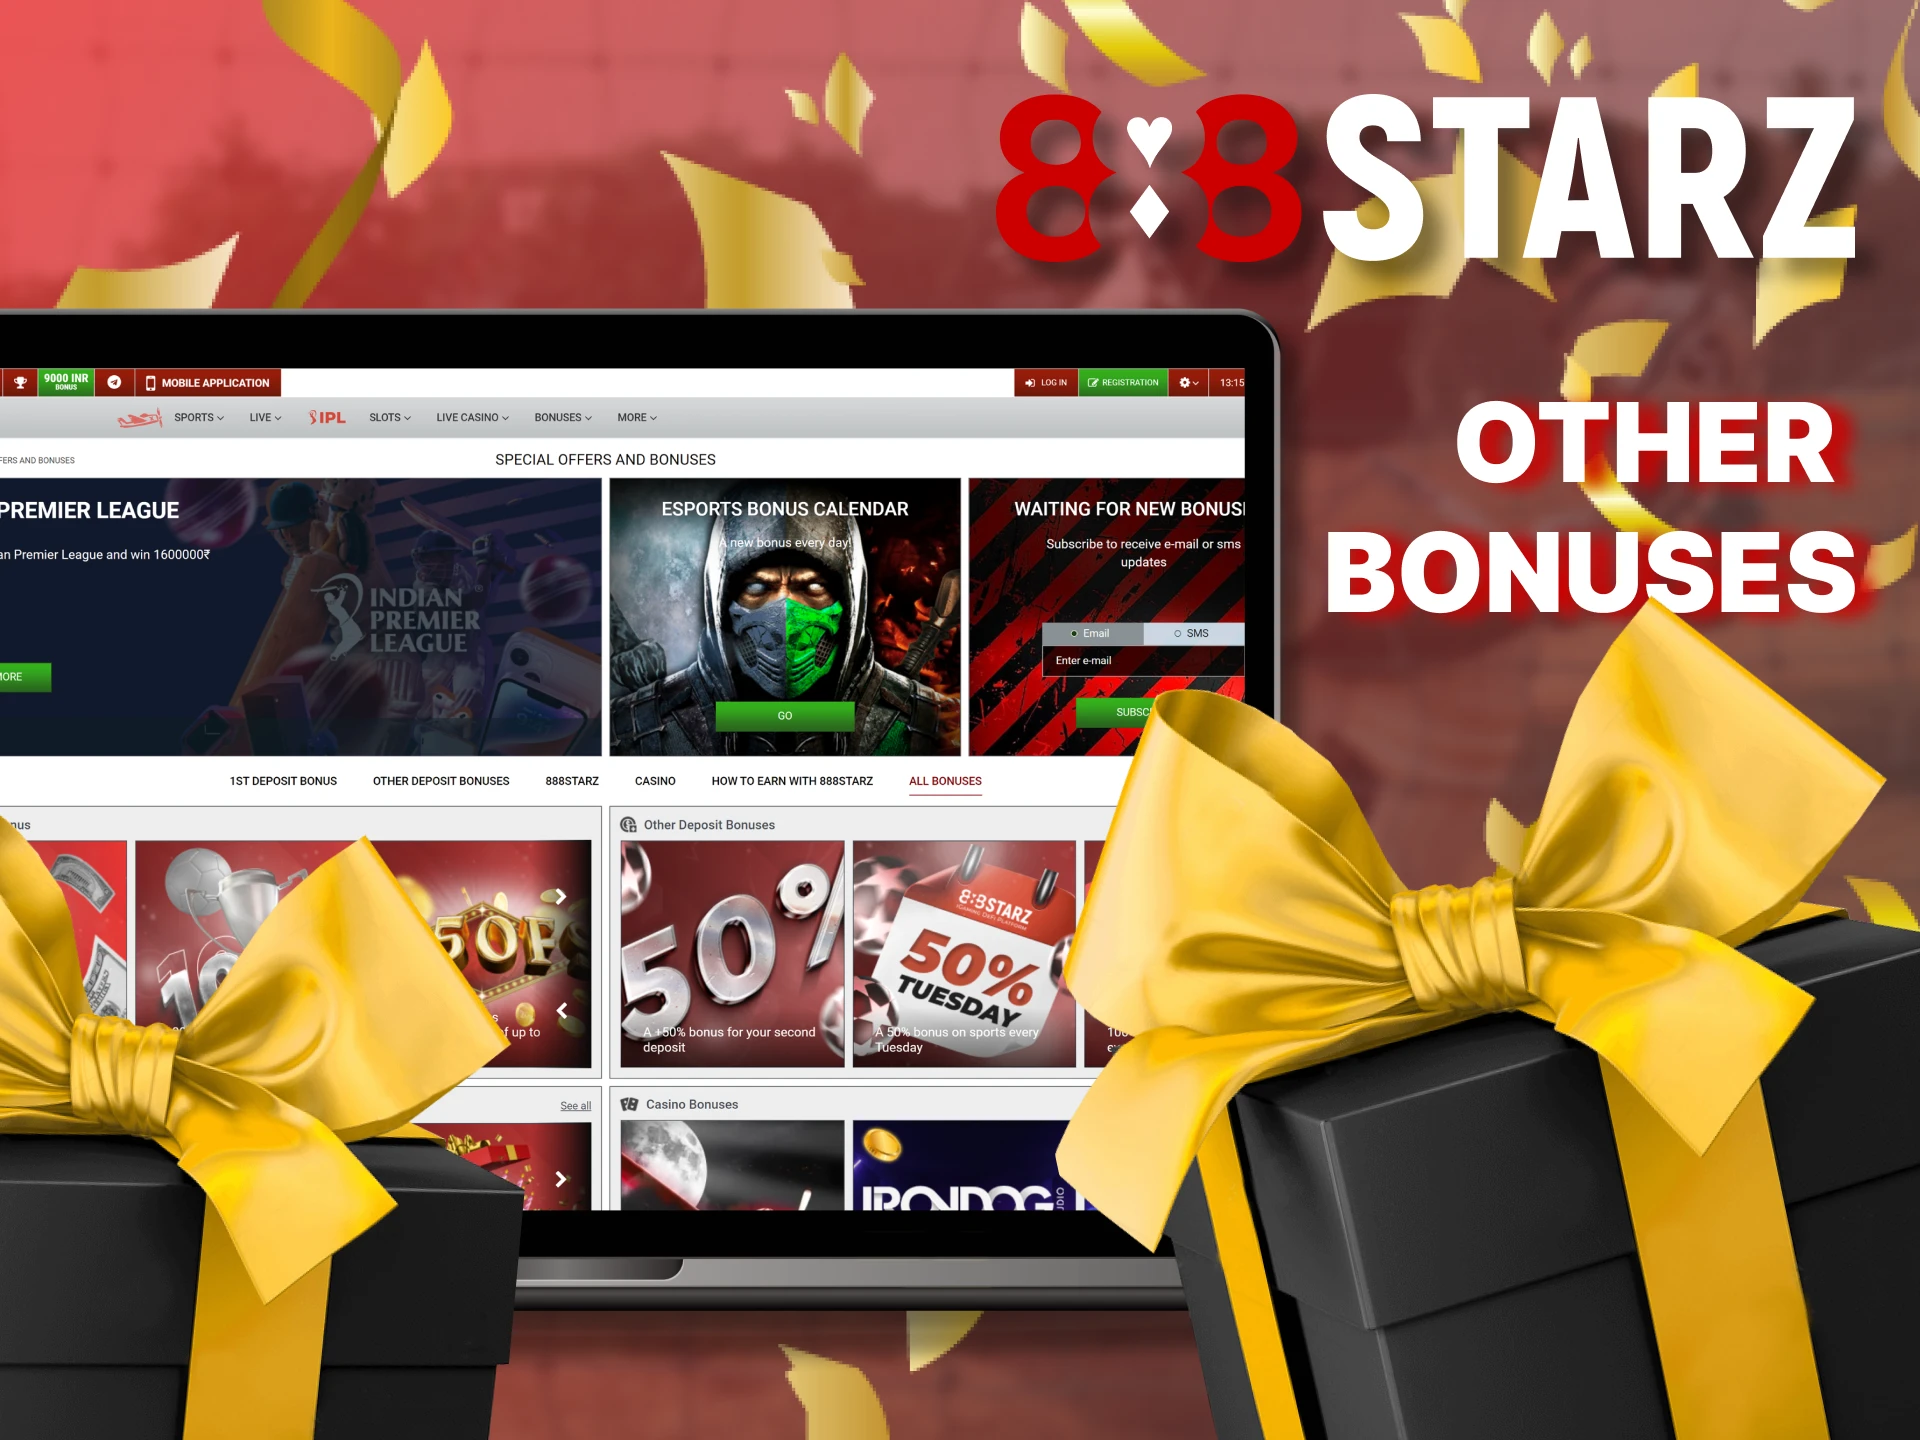 Learn more about other 888Starz bonuses.